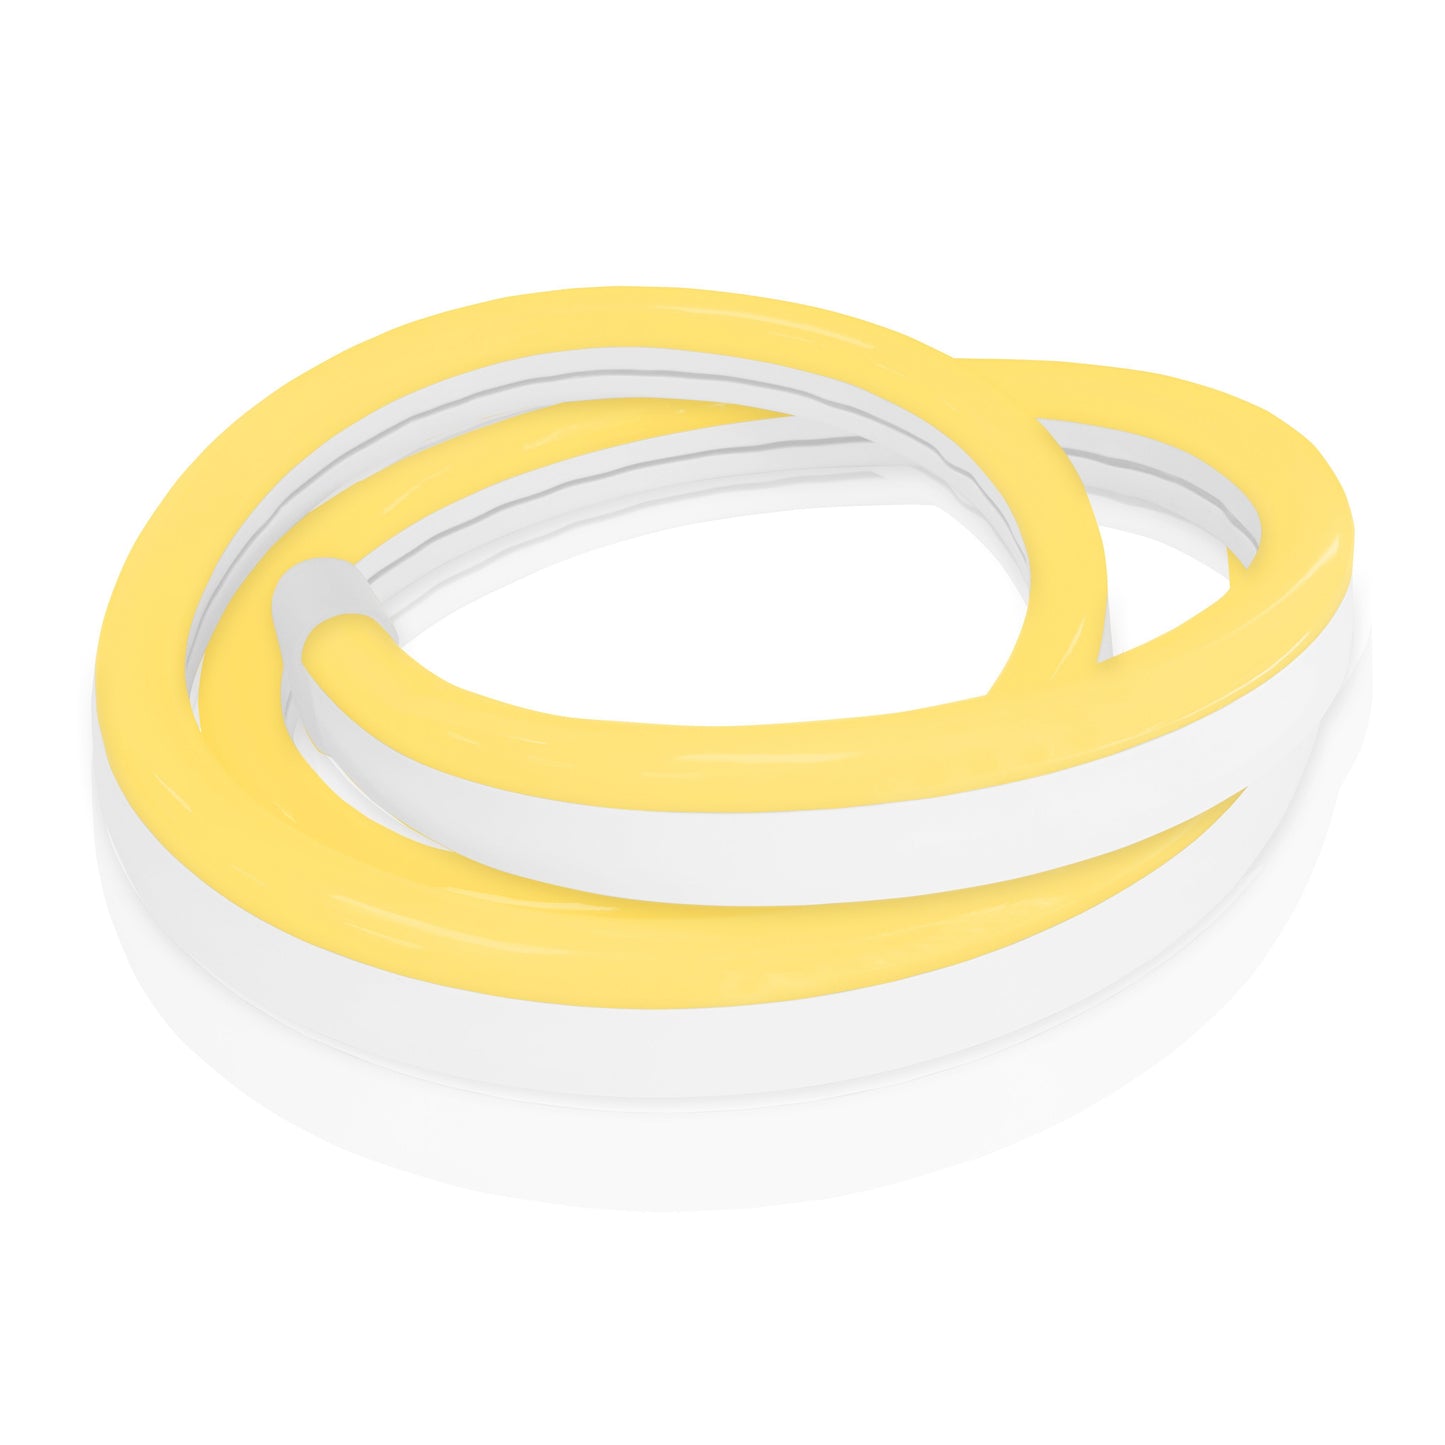 Load image into Gallery viewer, loosely coiled yellow neon led strip light
